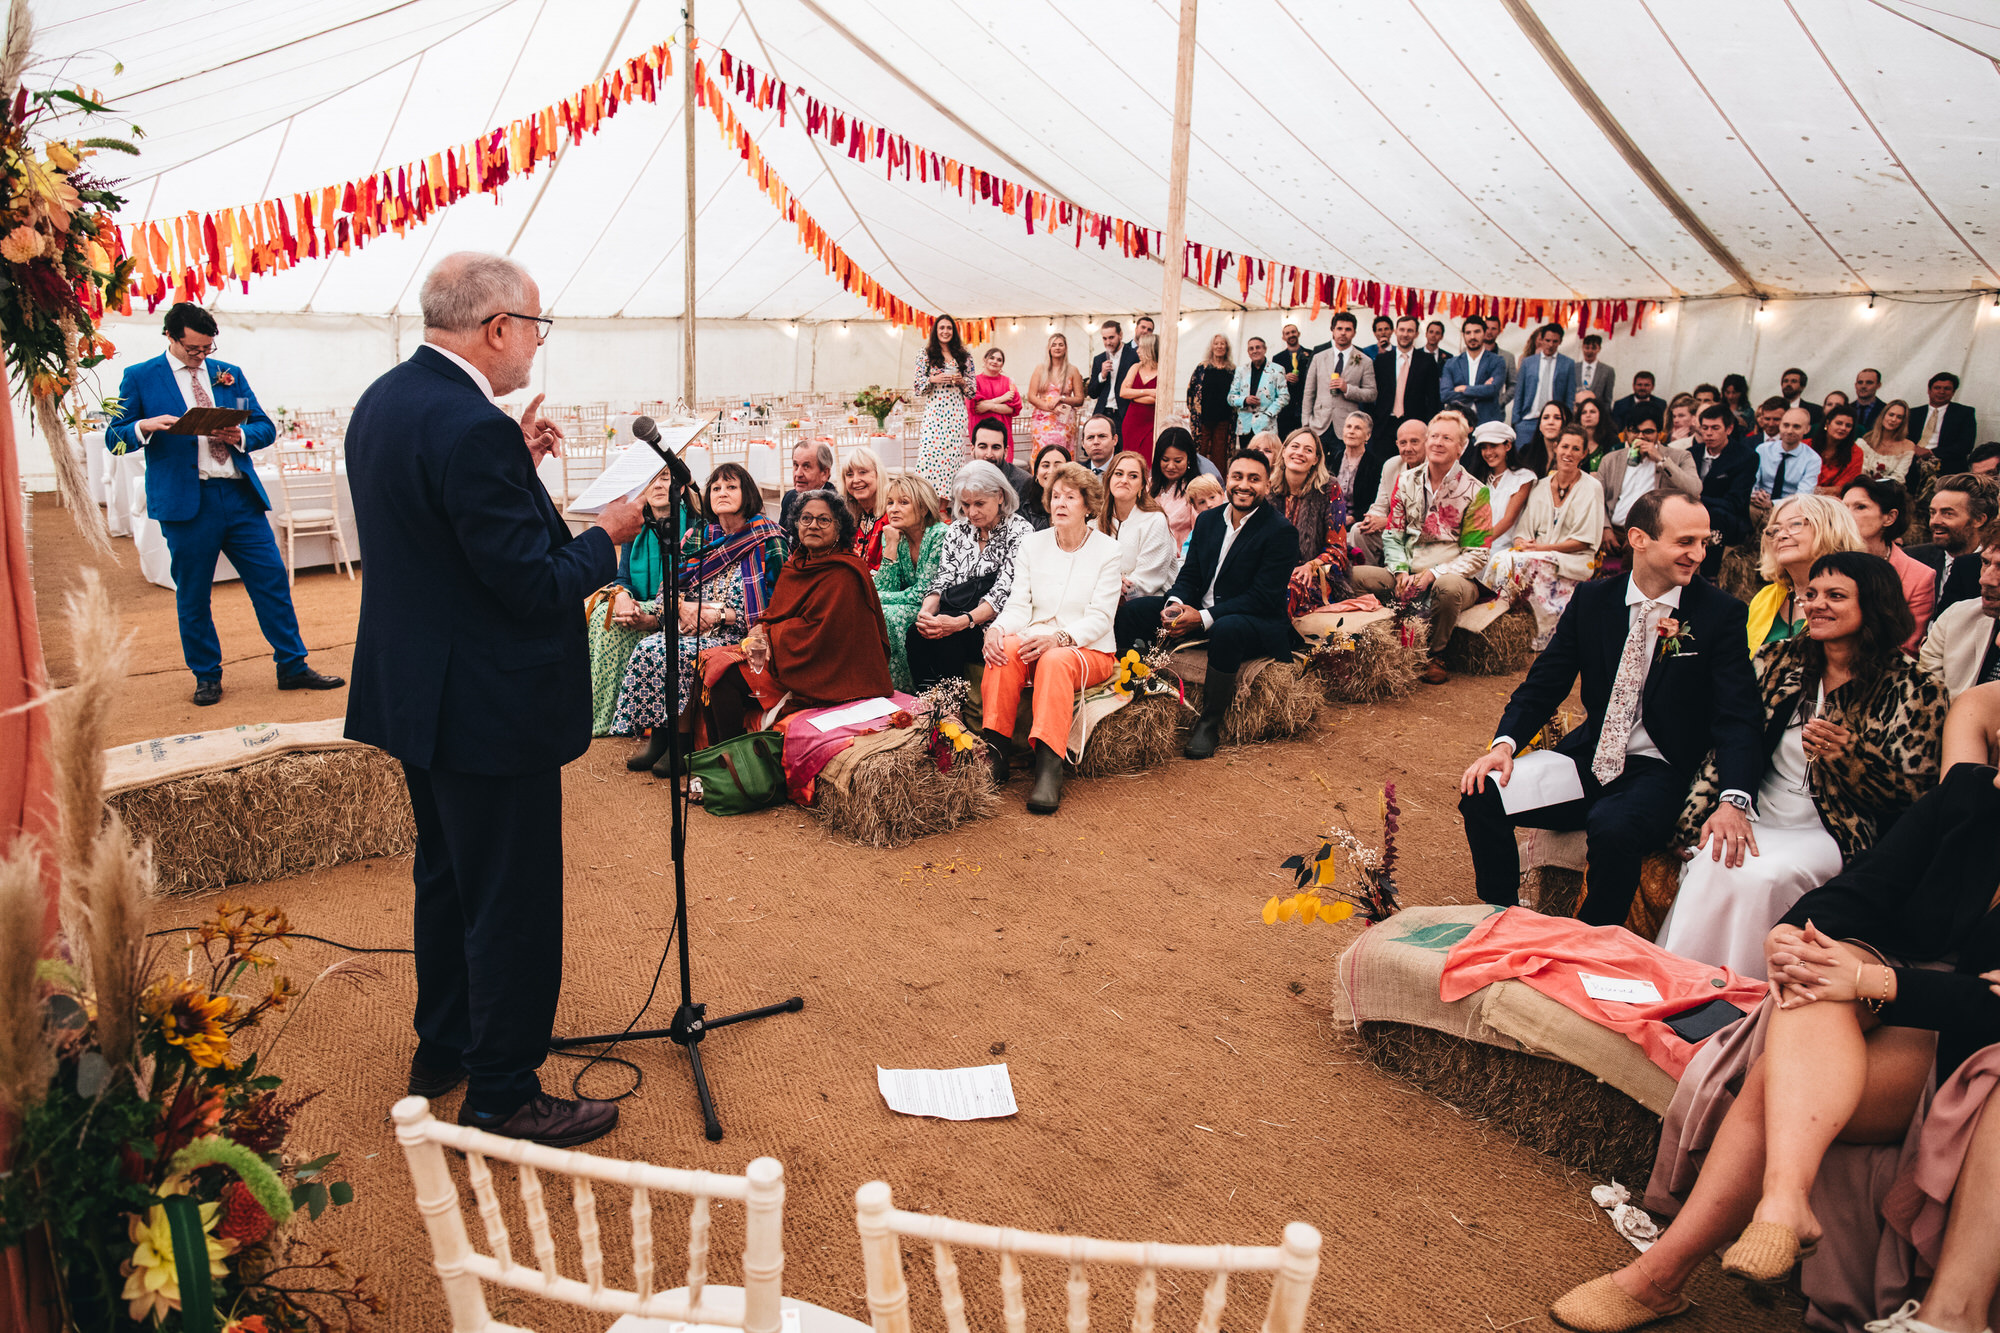 father of the bride making speech to guests in marquee tent